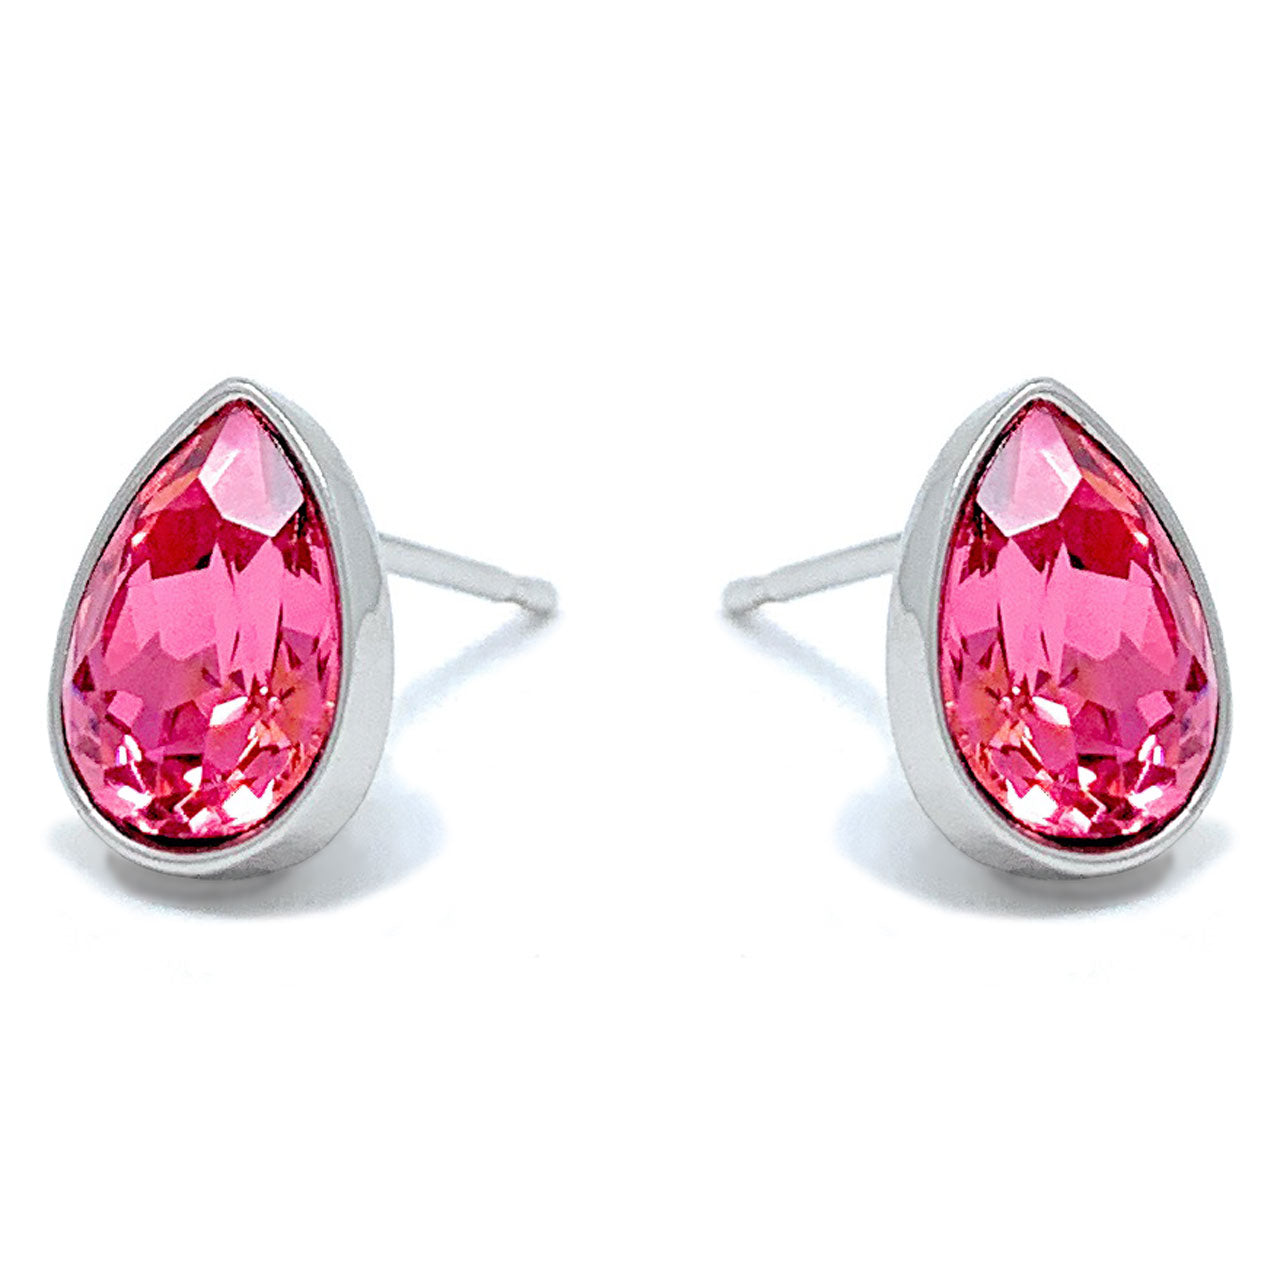 Mary Small Stud Earrings with Pink Rose Drop Crystals from Swarovski Silver Toned Rhodium Plated - Ed Heart